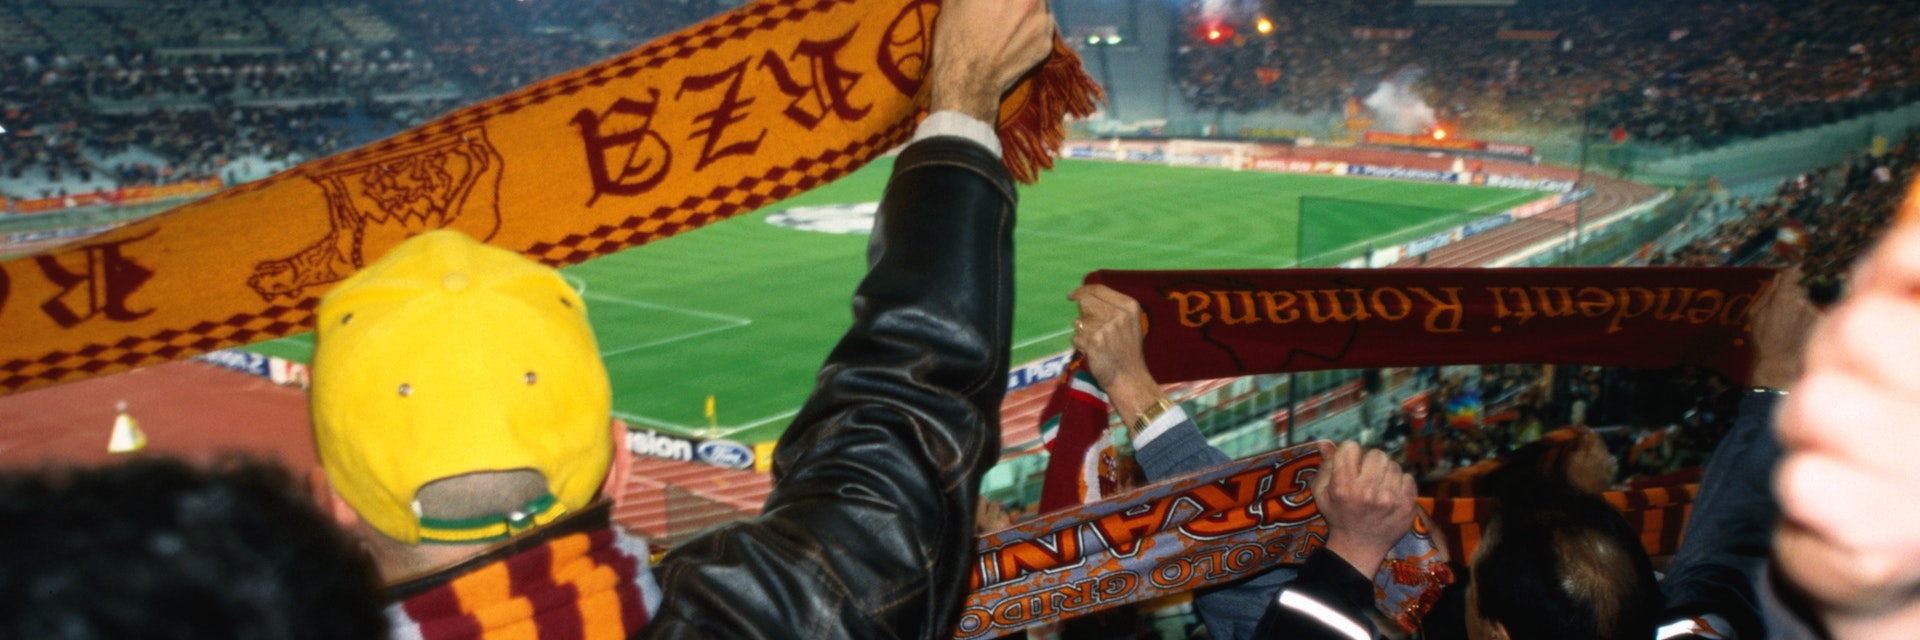 Soccer fans waving scarves at AS Roma versus Ajax Amsterdam match at Champions League Game Stadio Olimpico.